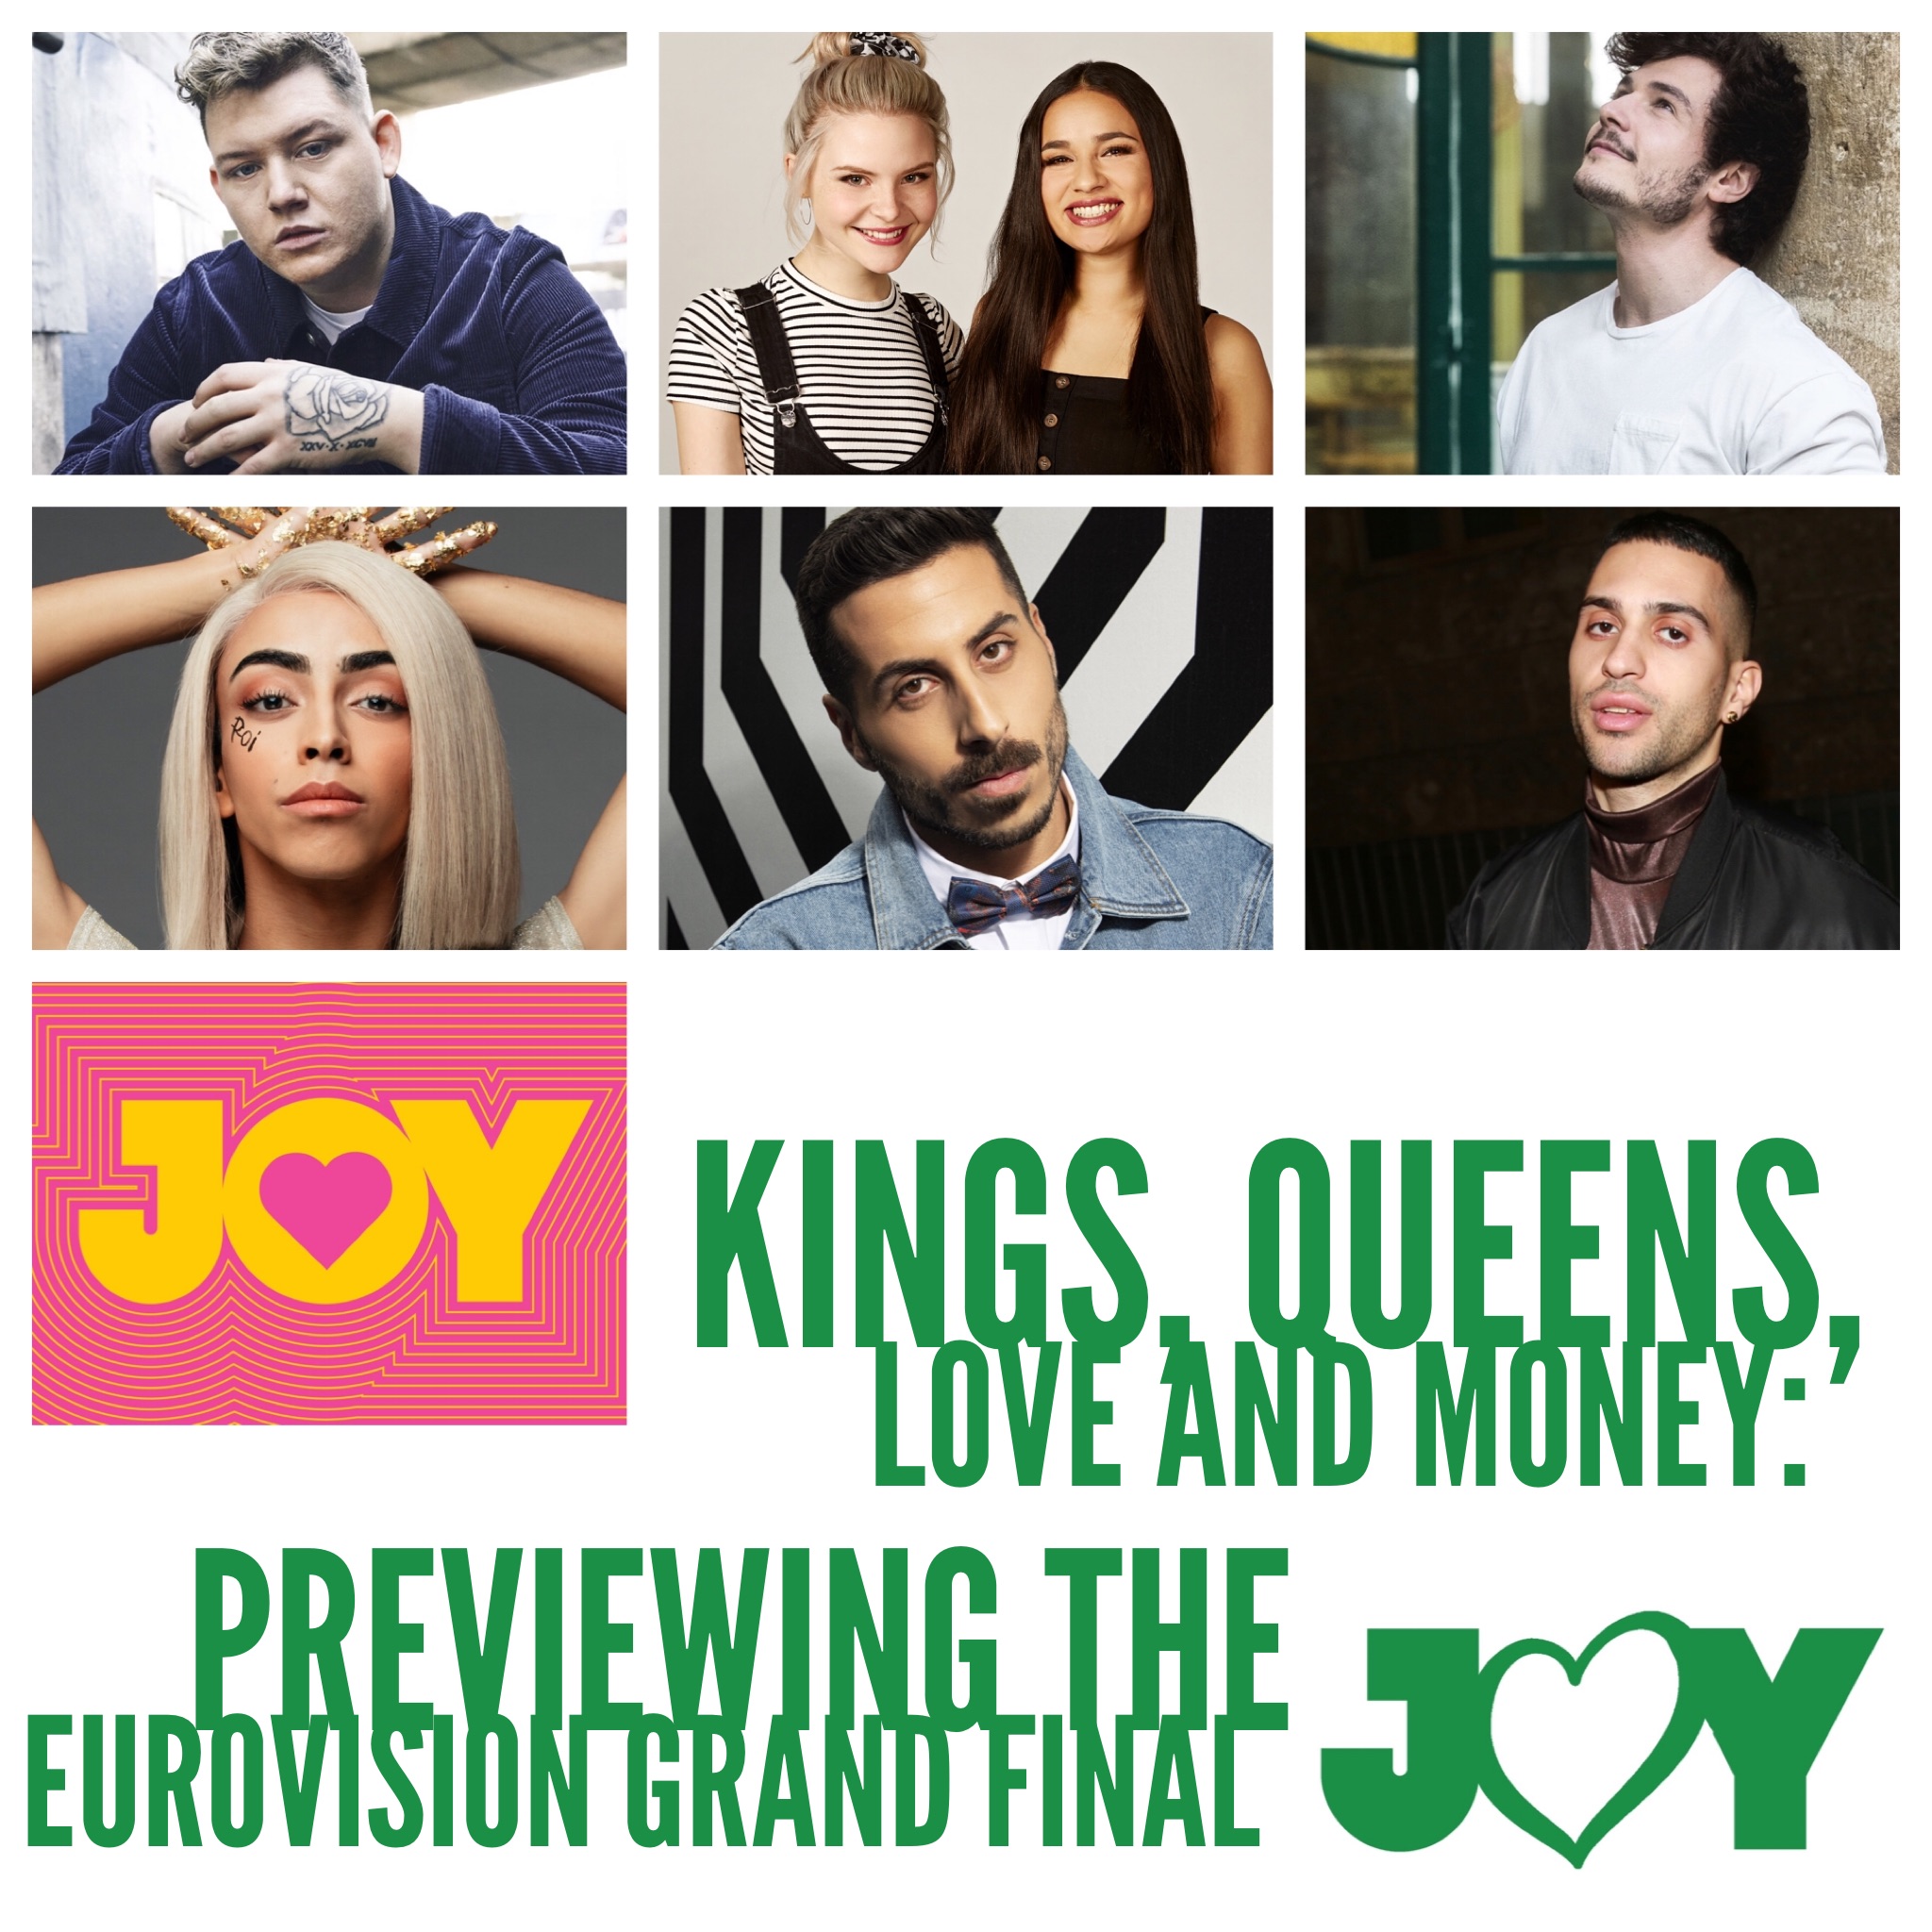 Eurovision 2019: Previewing the Grand Final